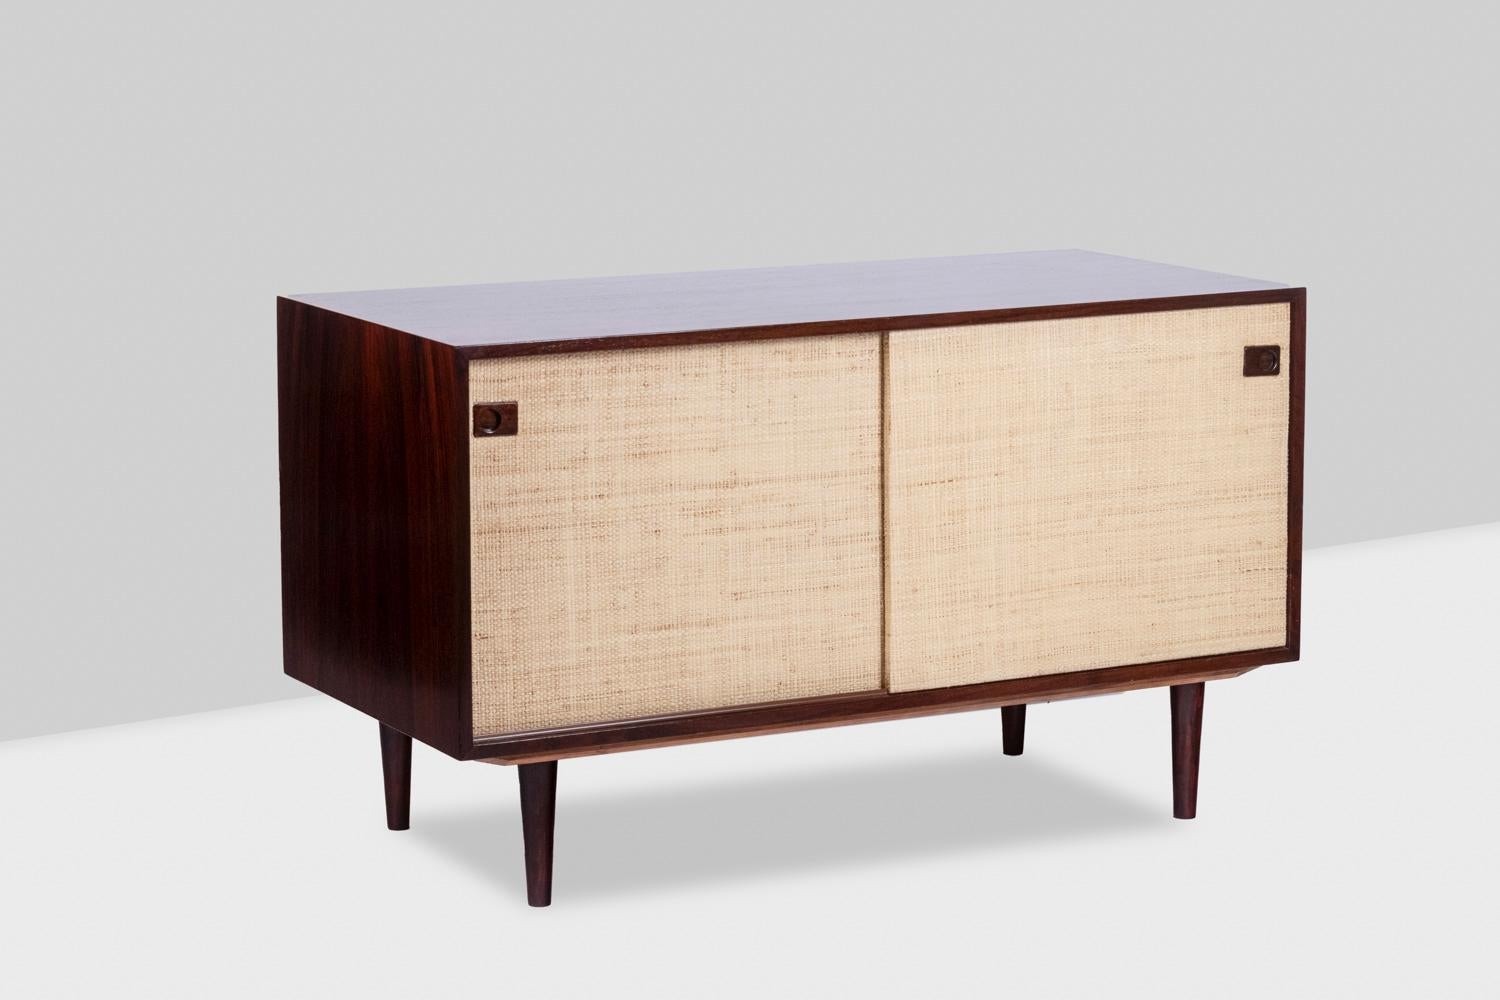 Rectangular rosewood sideboard opening with two sliding doors on the front, the doors covered in raffia. Spindle-shaped base. Rectangular shaped handles with a round shaped finish. Inside, a removable shelf in the center, the whole forming two